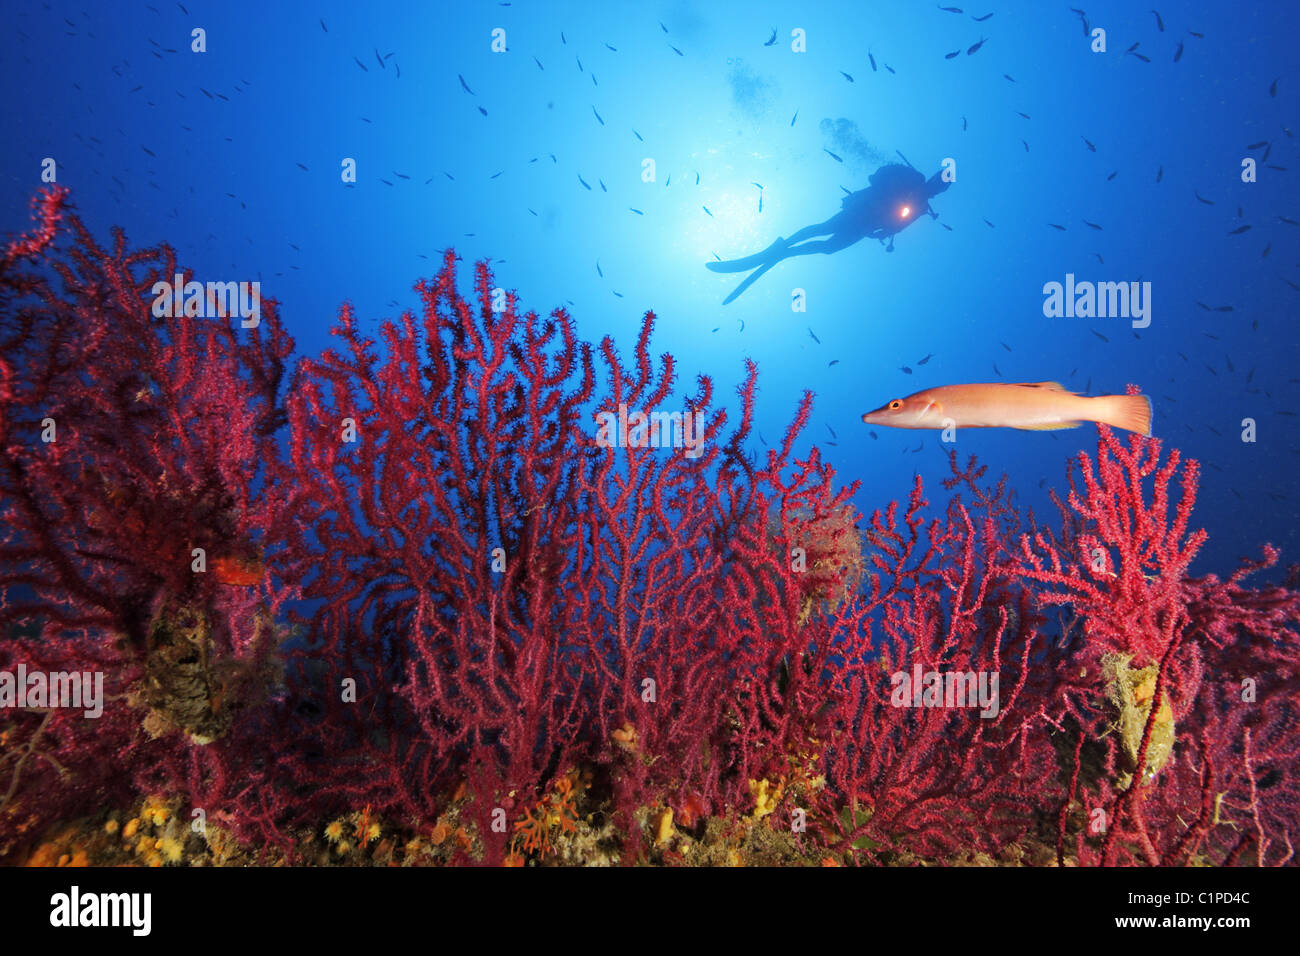 Scuba diver on reef with red gorgonians Stock Photo